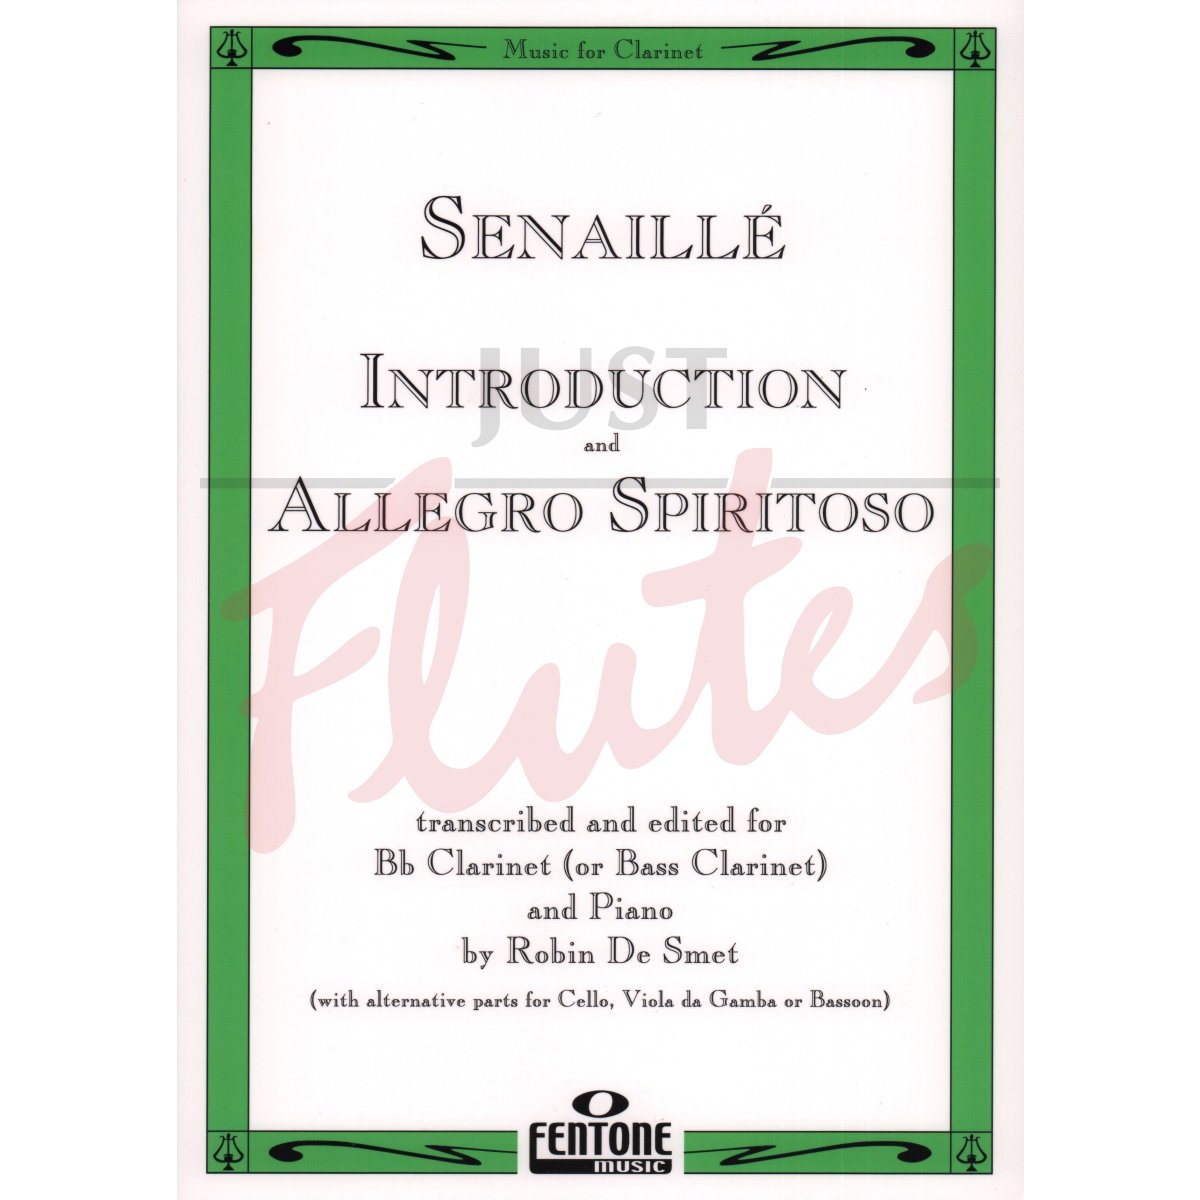 Introduction and Allegro Spiritoso for Clarinet and Piano